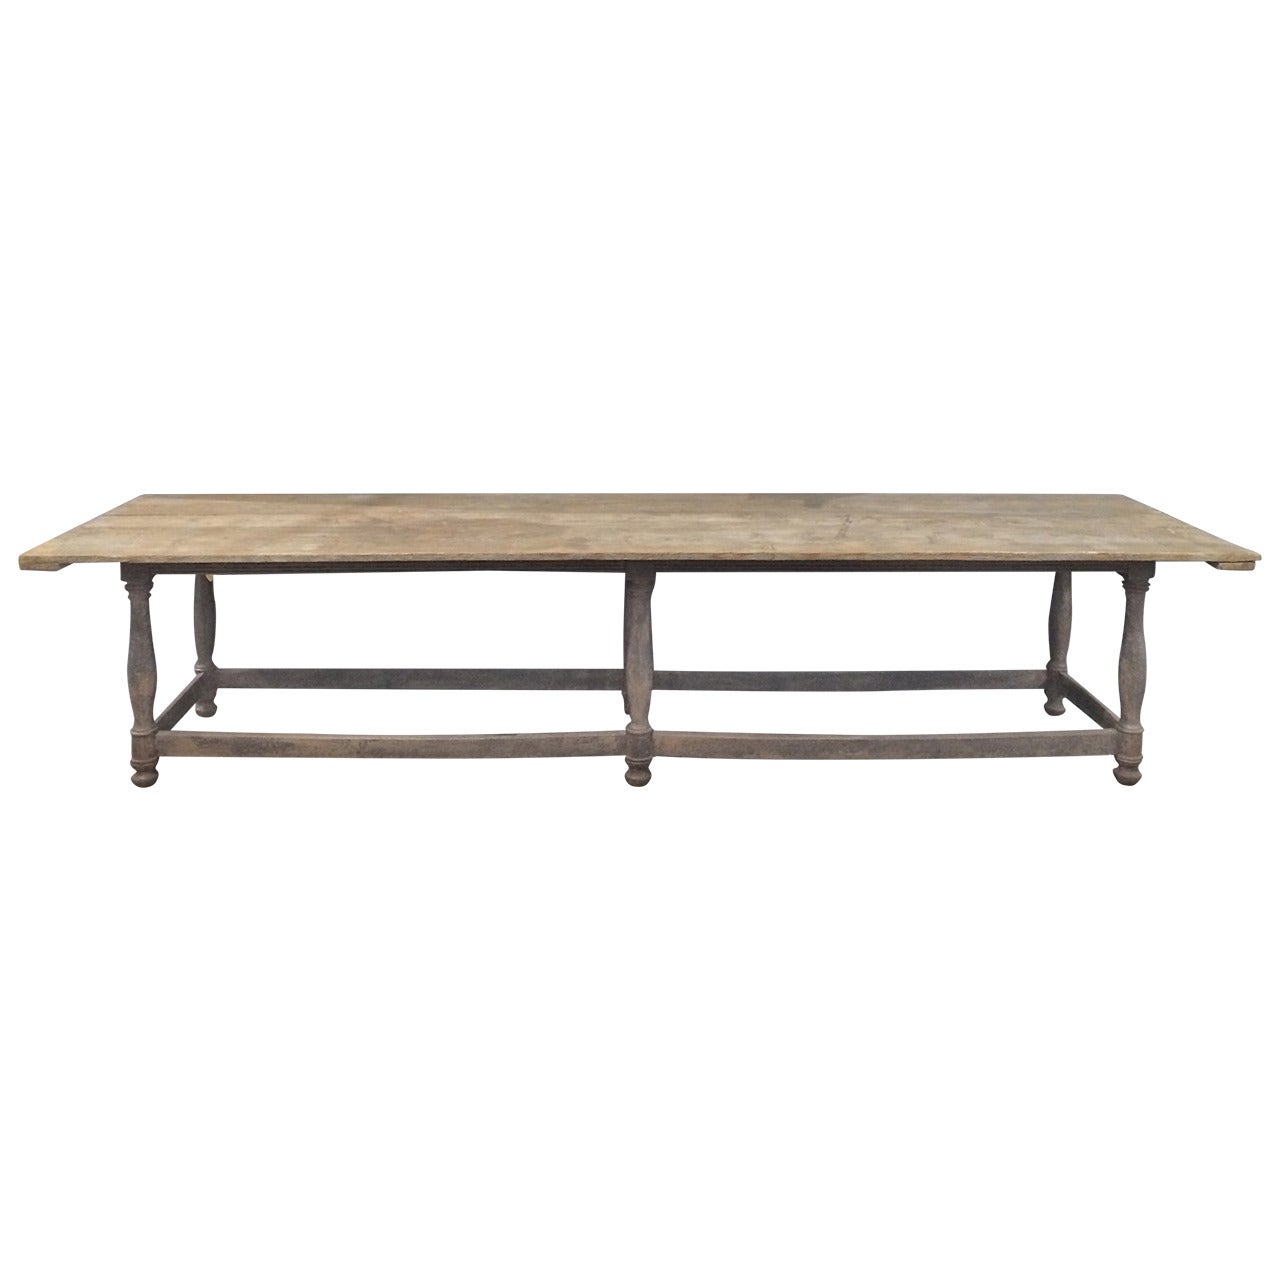 Large 19th Century French Gray Refectory Table